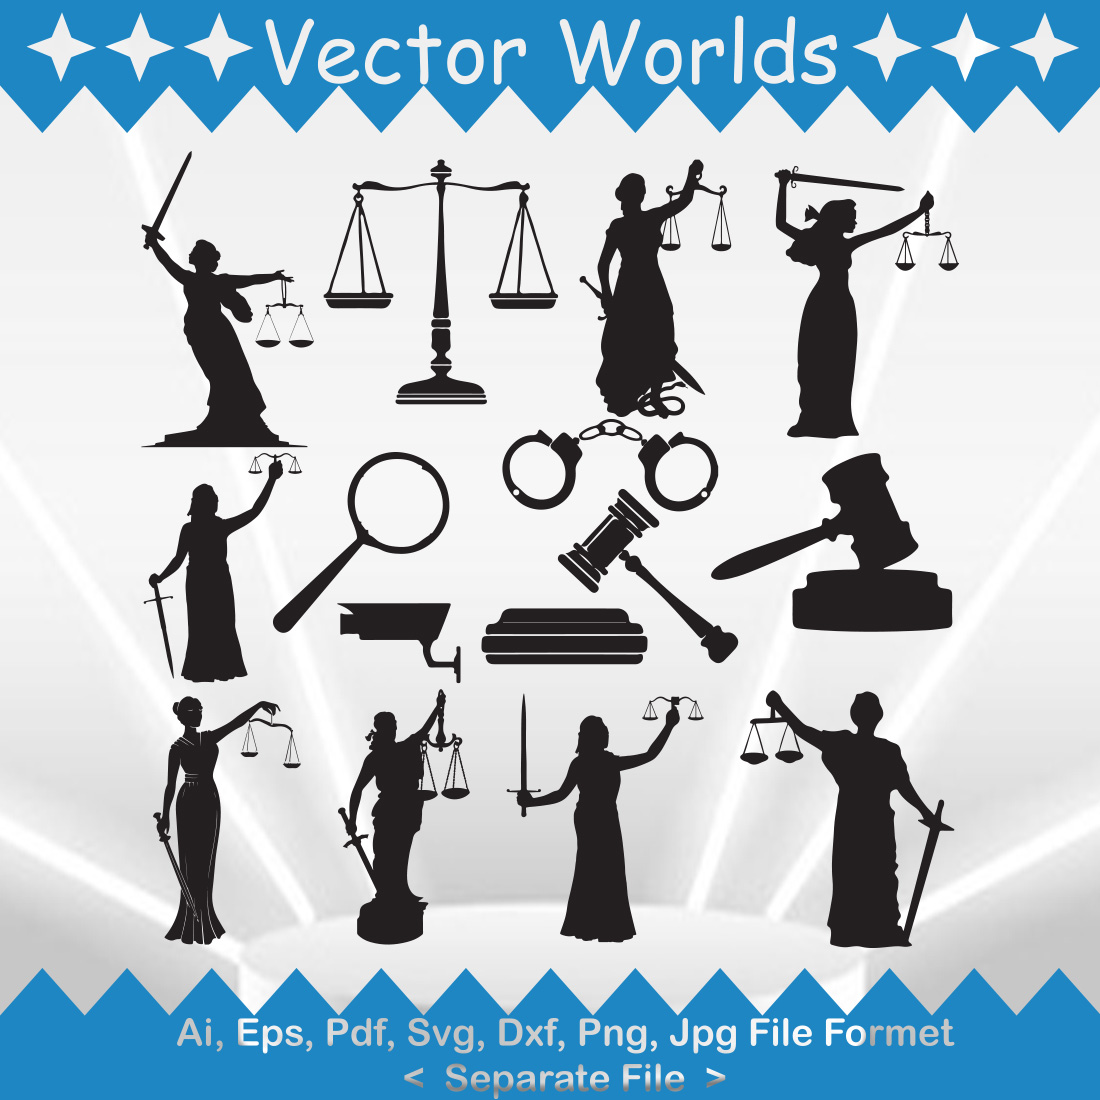 Lady Justice SVG Vector Design cover image.